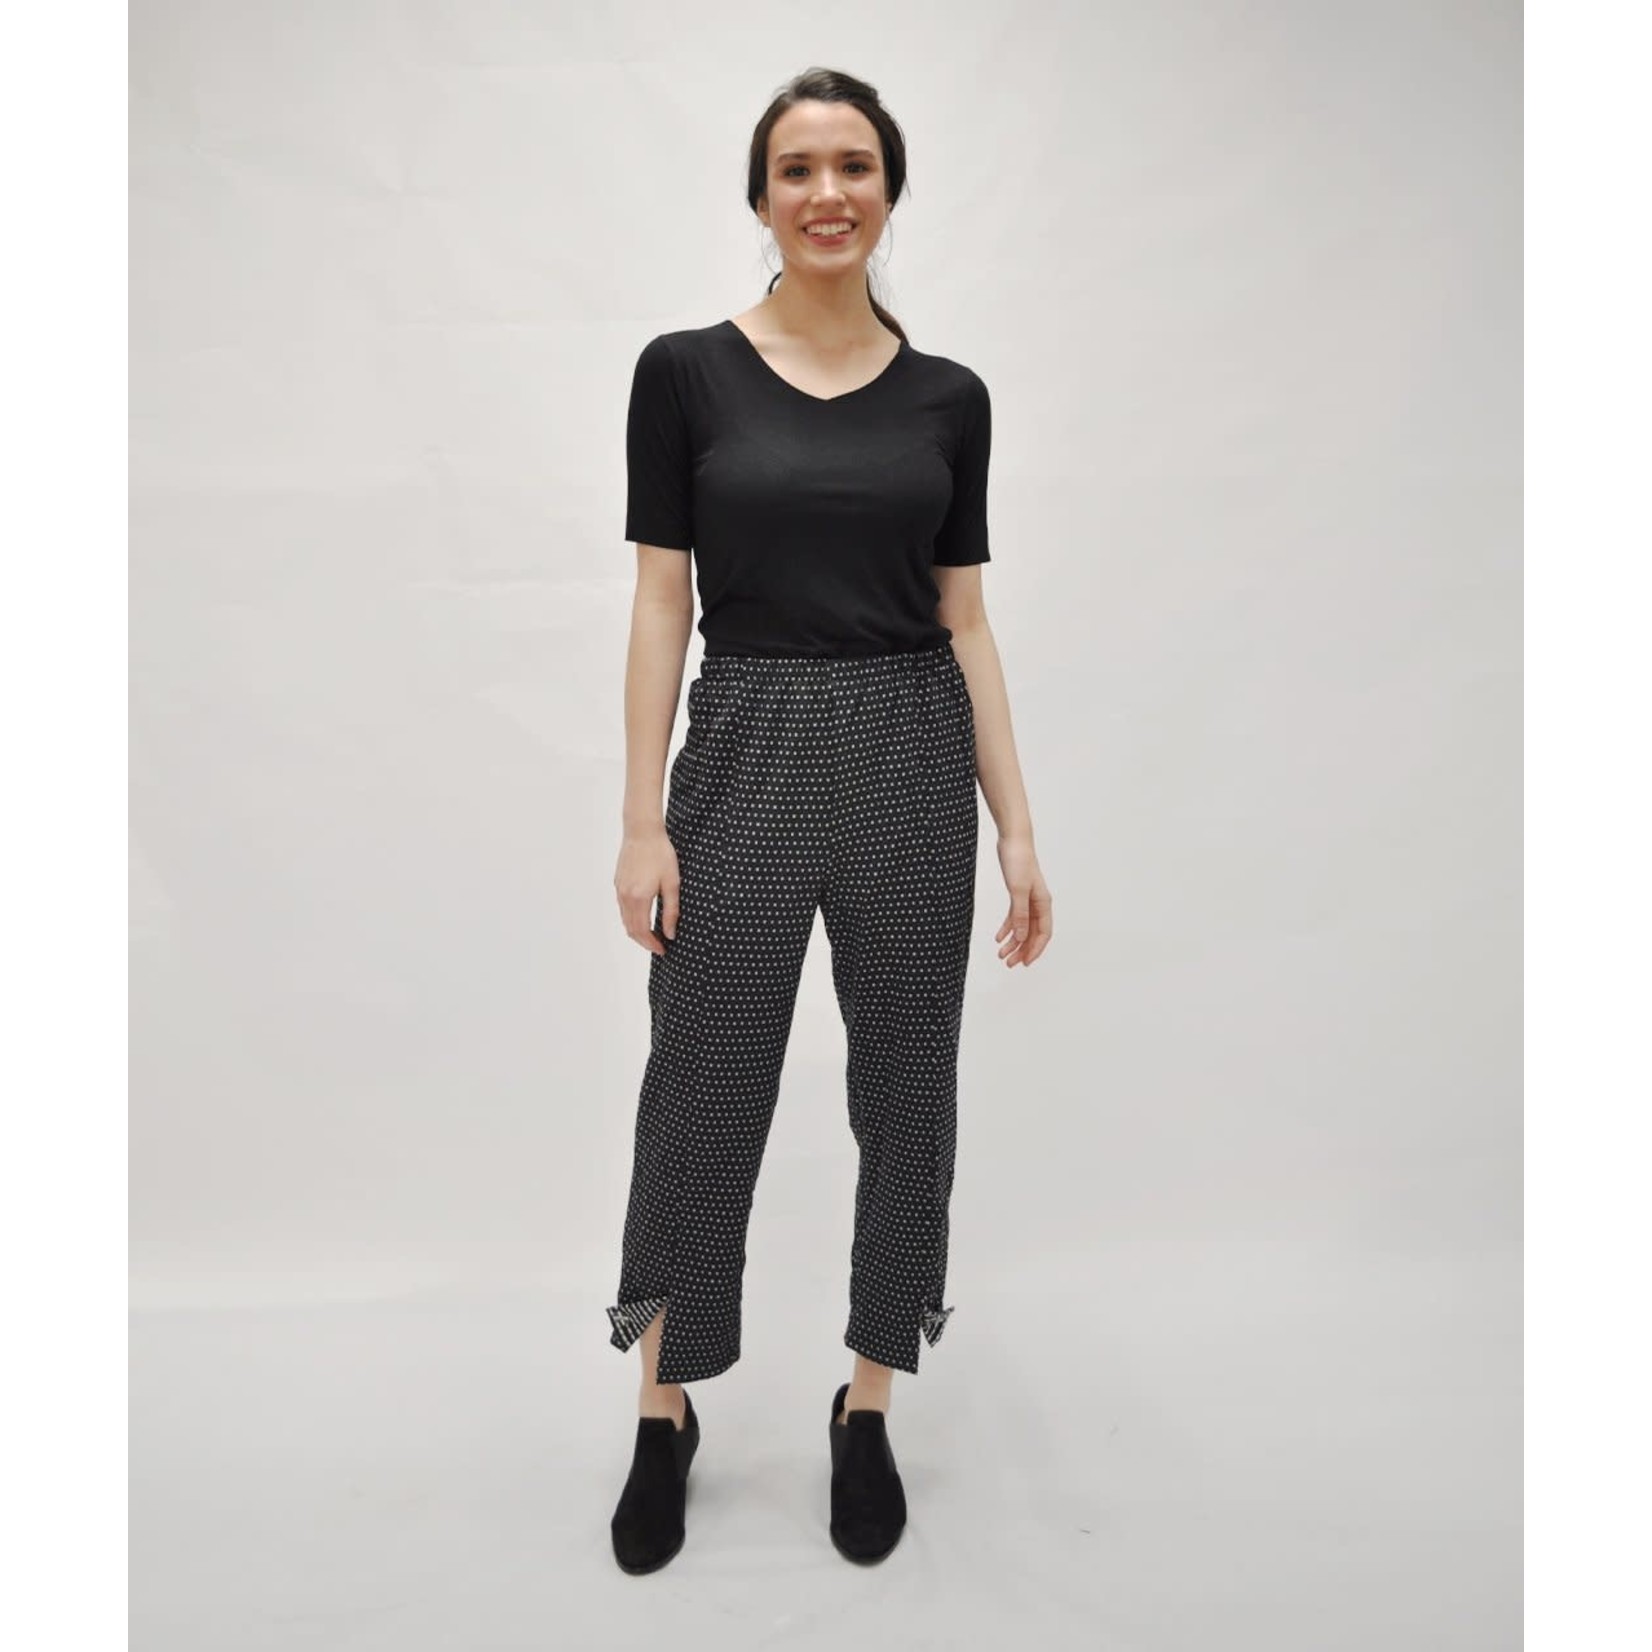 Niche Whimsy Crush Rover Pant  in Blk/White